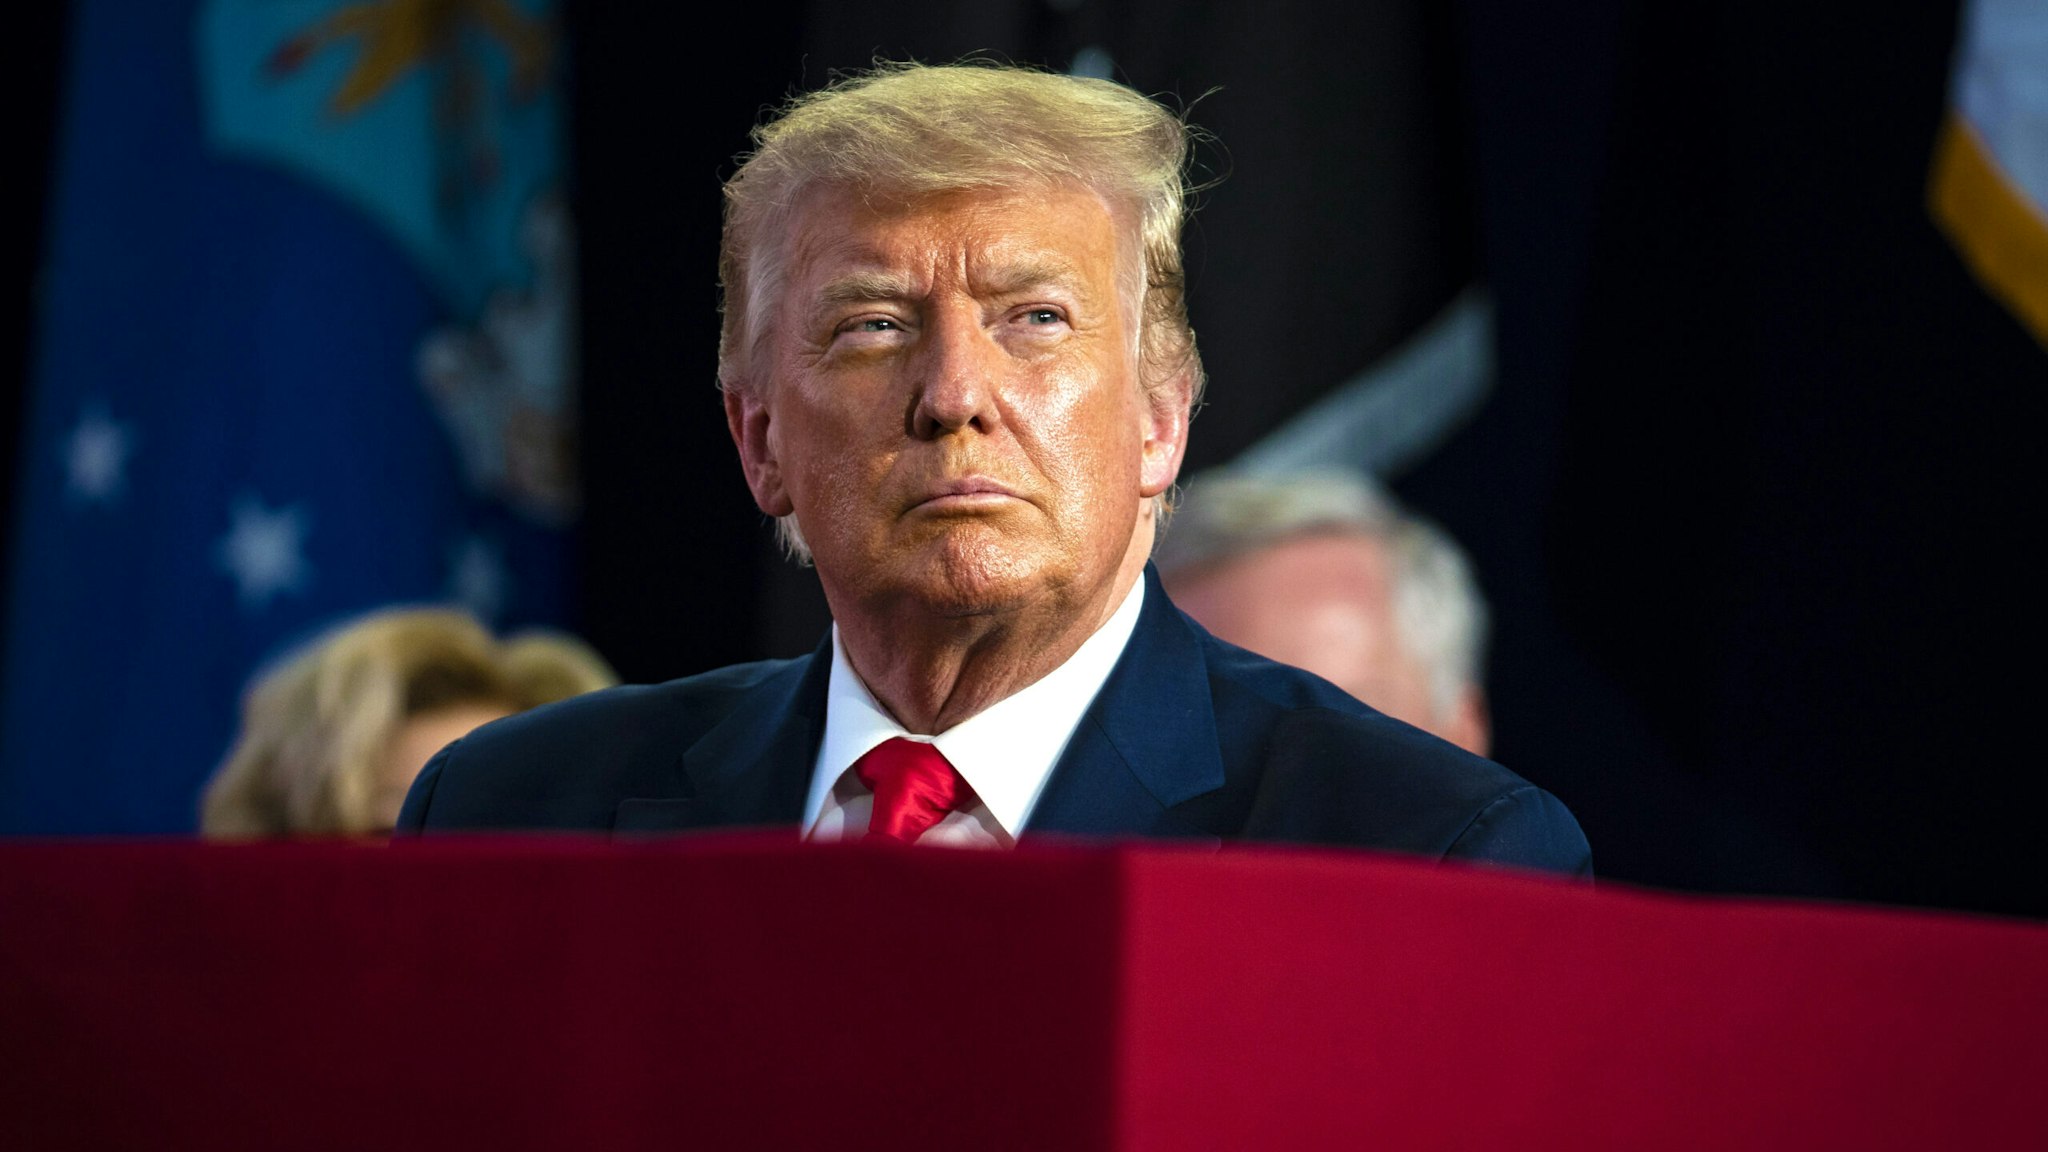 U.S. President Donald Trump attends during an event at Mount Rushmore National Memorial in Keystone, South Dakota, U.S., on Friday, July 3, 2020. The early Independence Day celebration, which will feature a military flyover and the first fireworks in more than a decade, is expected to include about 7,500 ticketed guests who won't be required to wear masks or socially distance despite a spike in U.S. coronavirus cases.